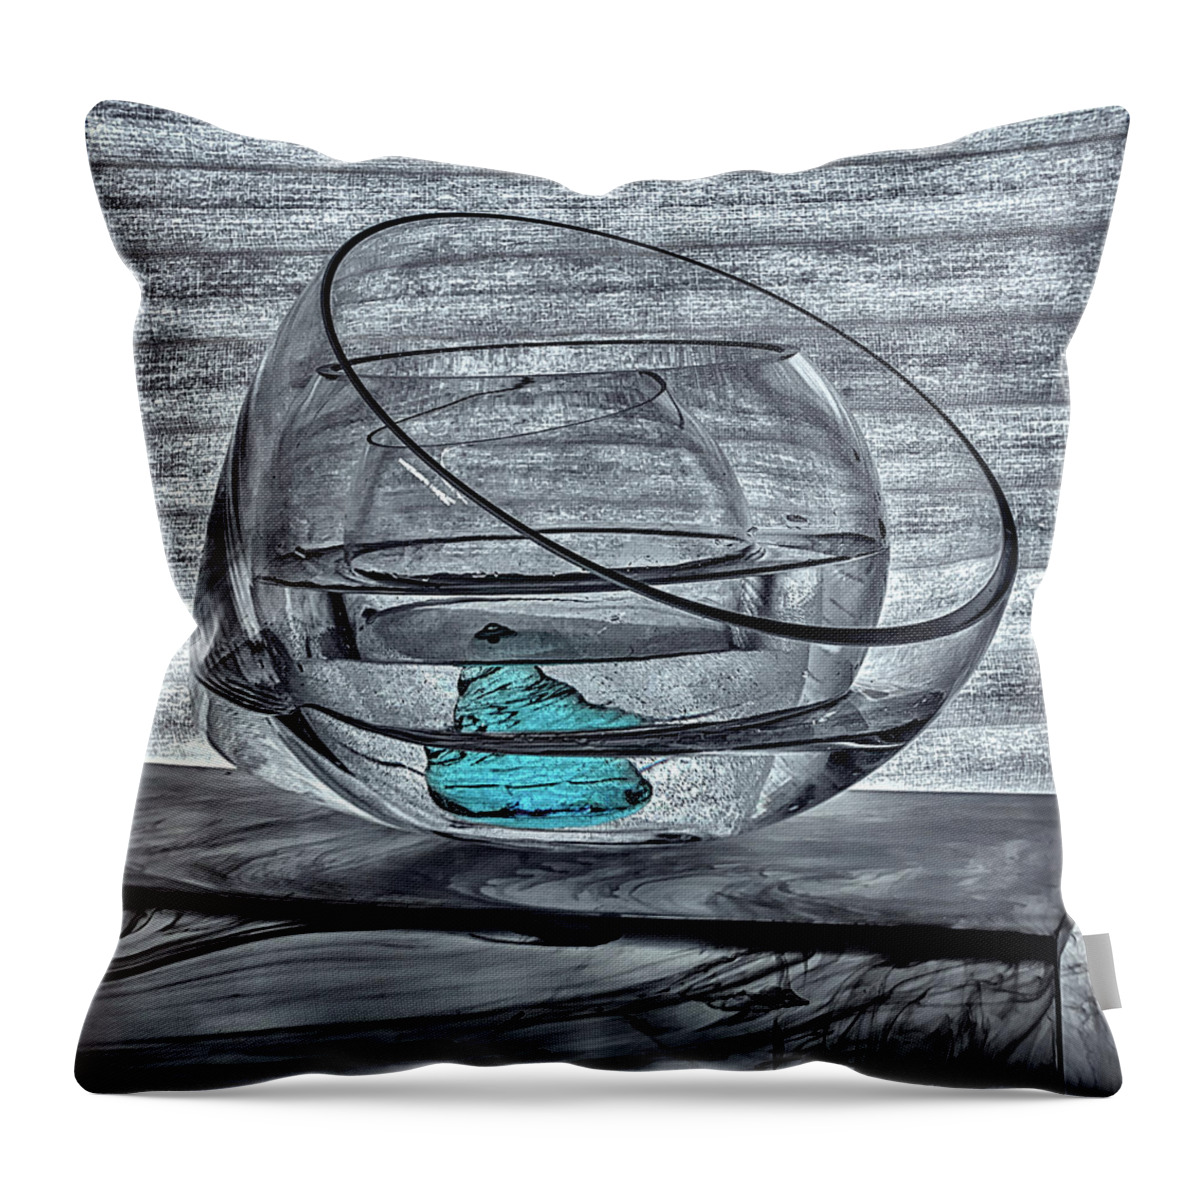  Glass Throw Pillow featuring the photograph Water And Glass III by Andrei SKY